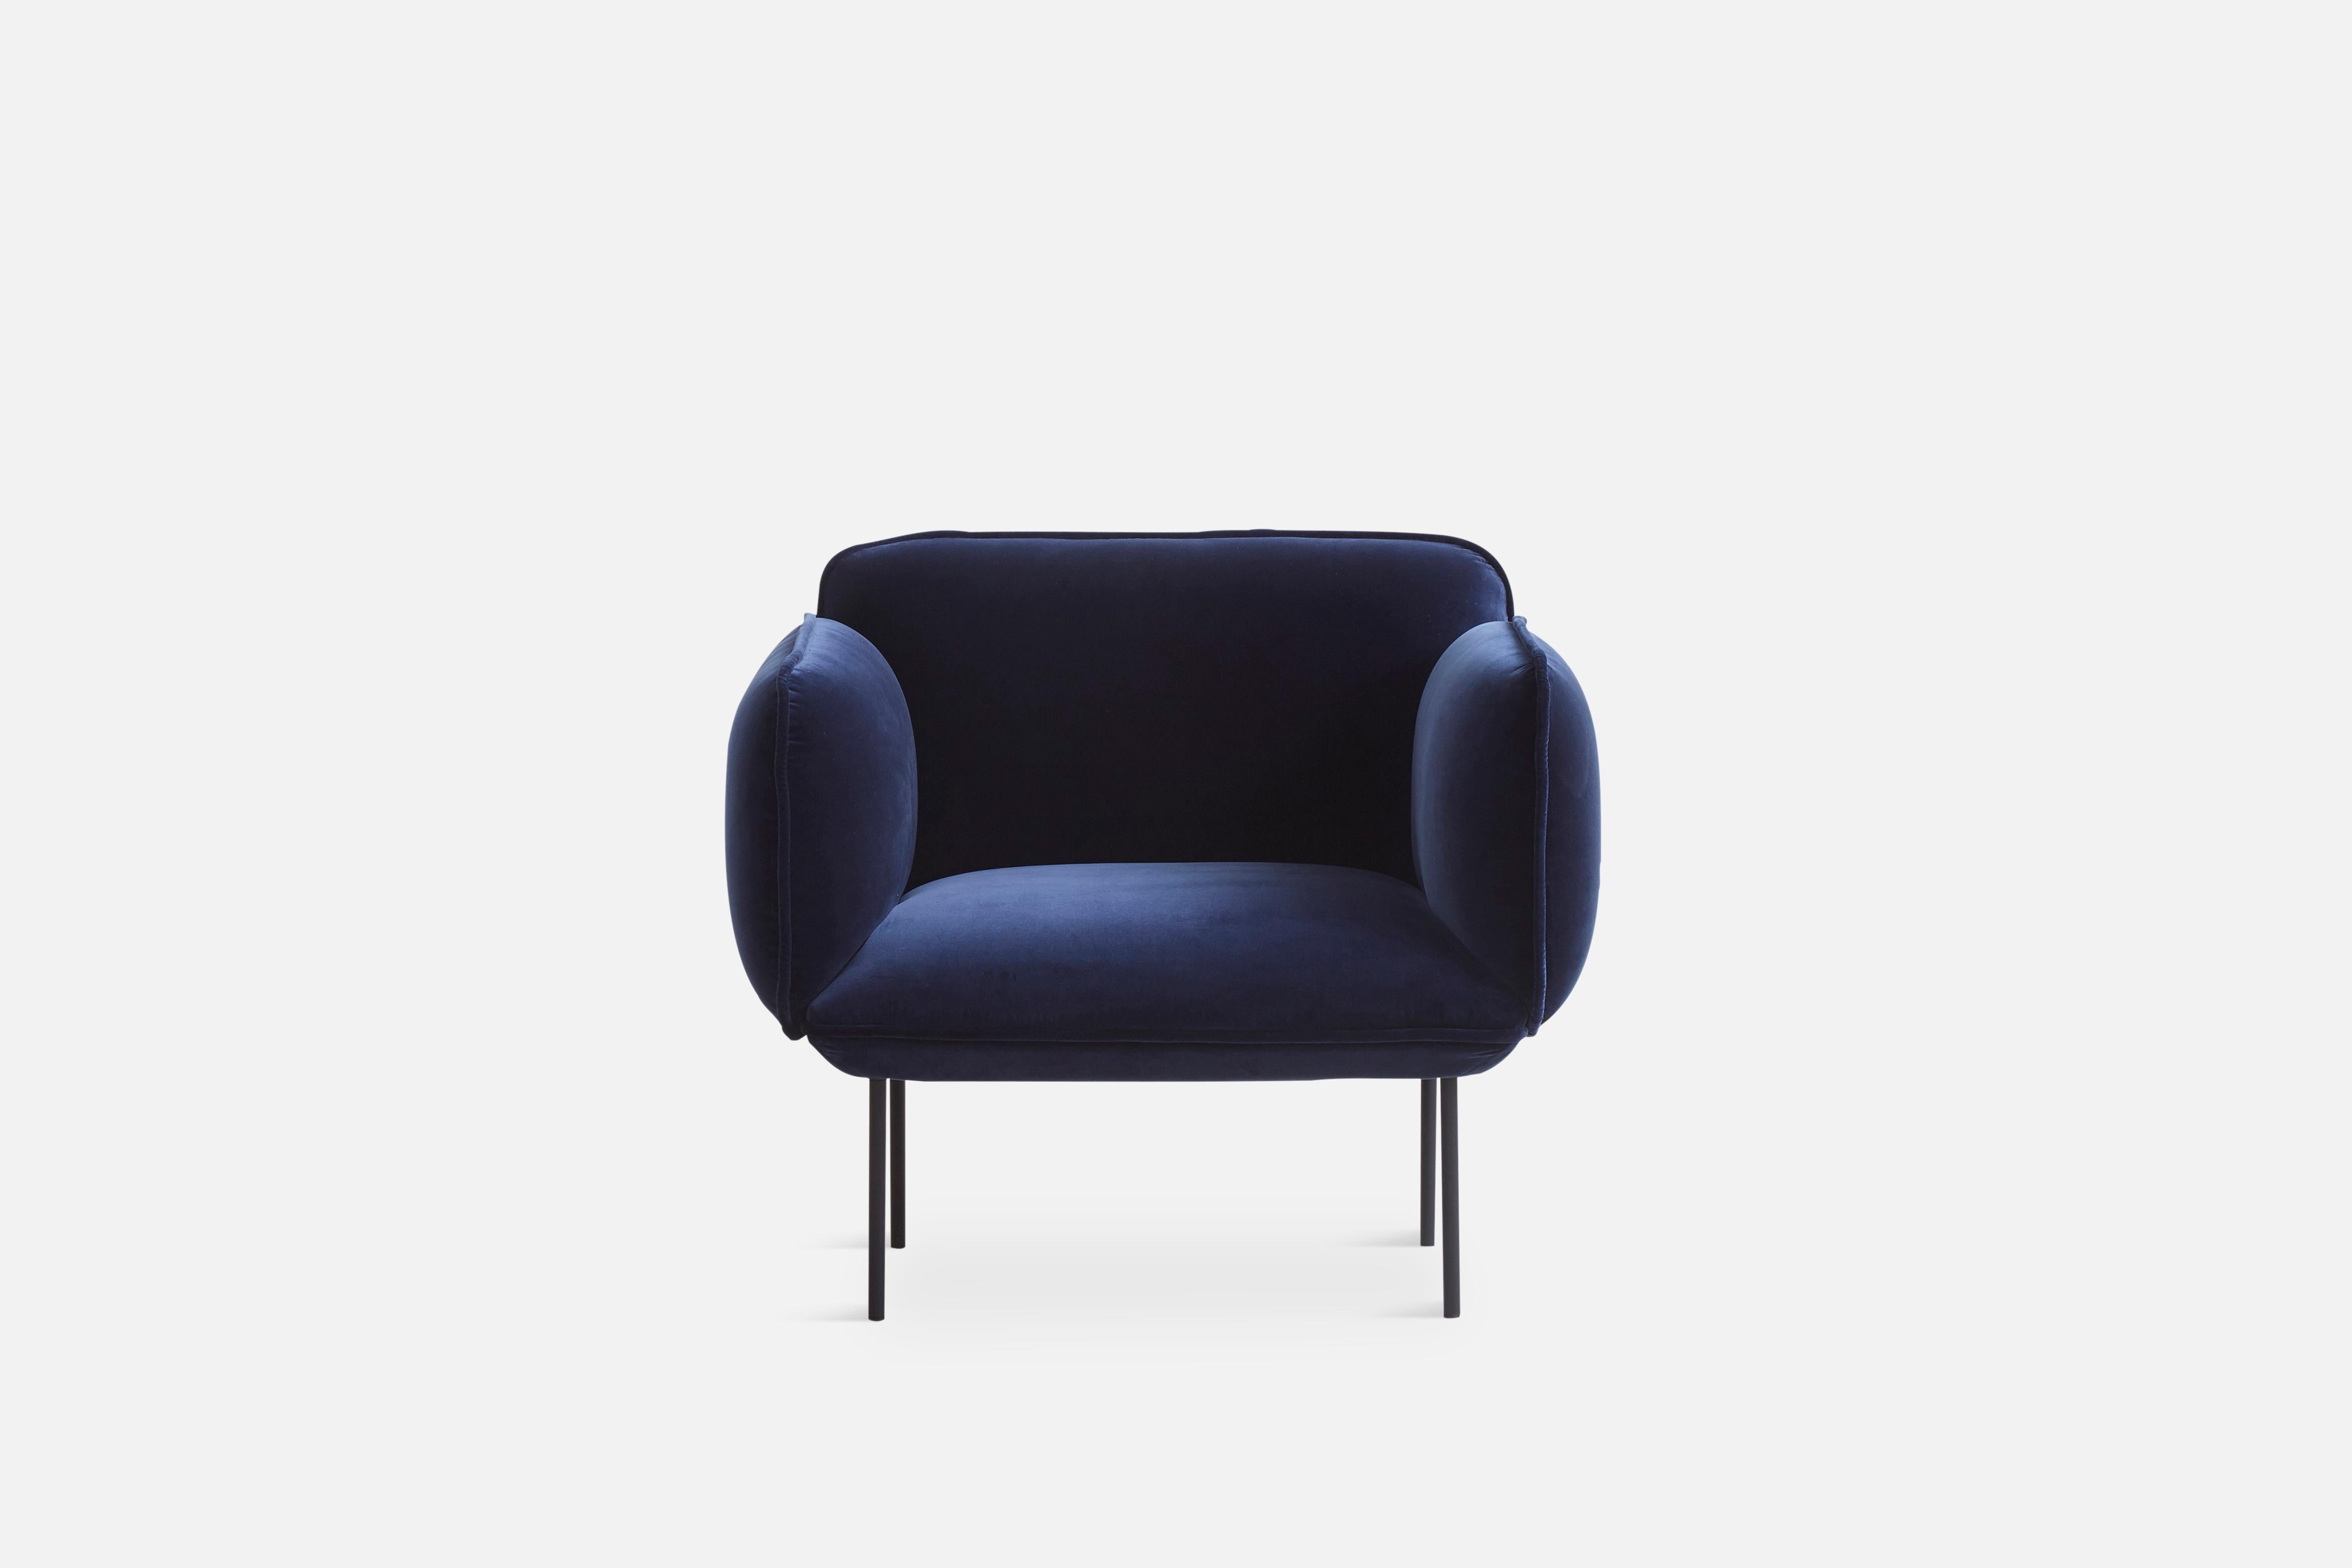 Nakki seater 1 by Mika Tolvanen.
Materials: Foam, Plywood, Elastic Belts, Memory Foam, Fabric (Harald 3, 0182).
Dimensions: D 78 x W 97 x H 83 cm.
Also available in different colours and materials. 

The founders, Mia and Torben Koed, decided